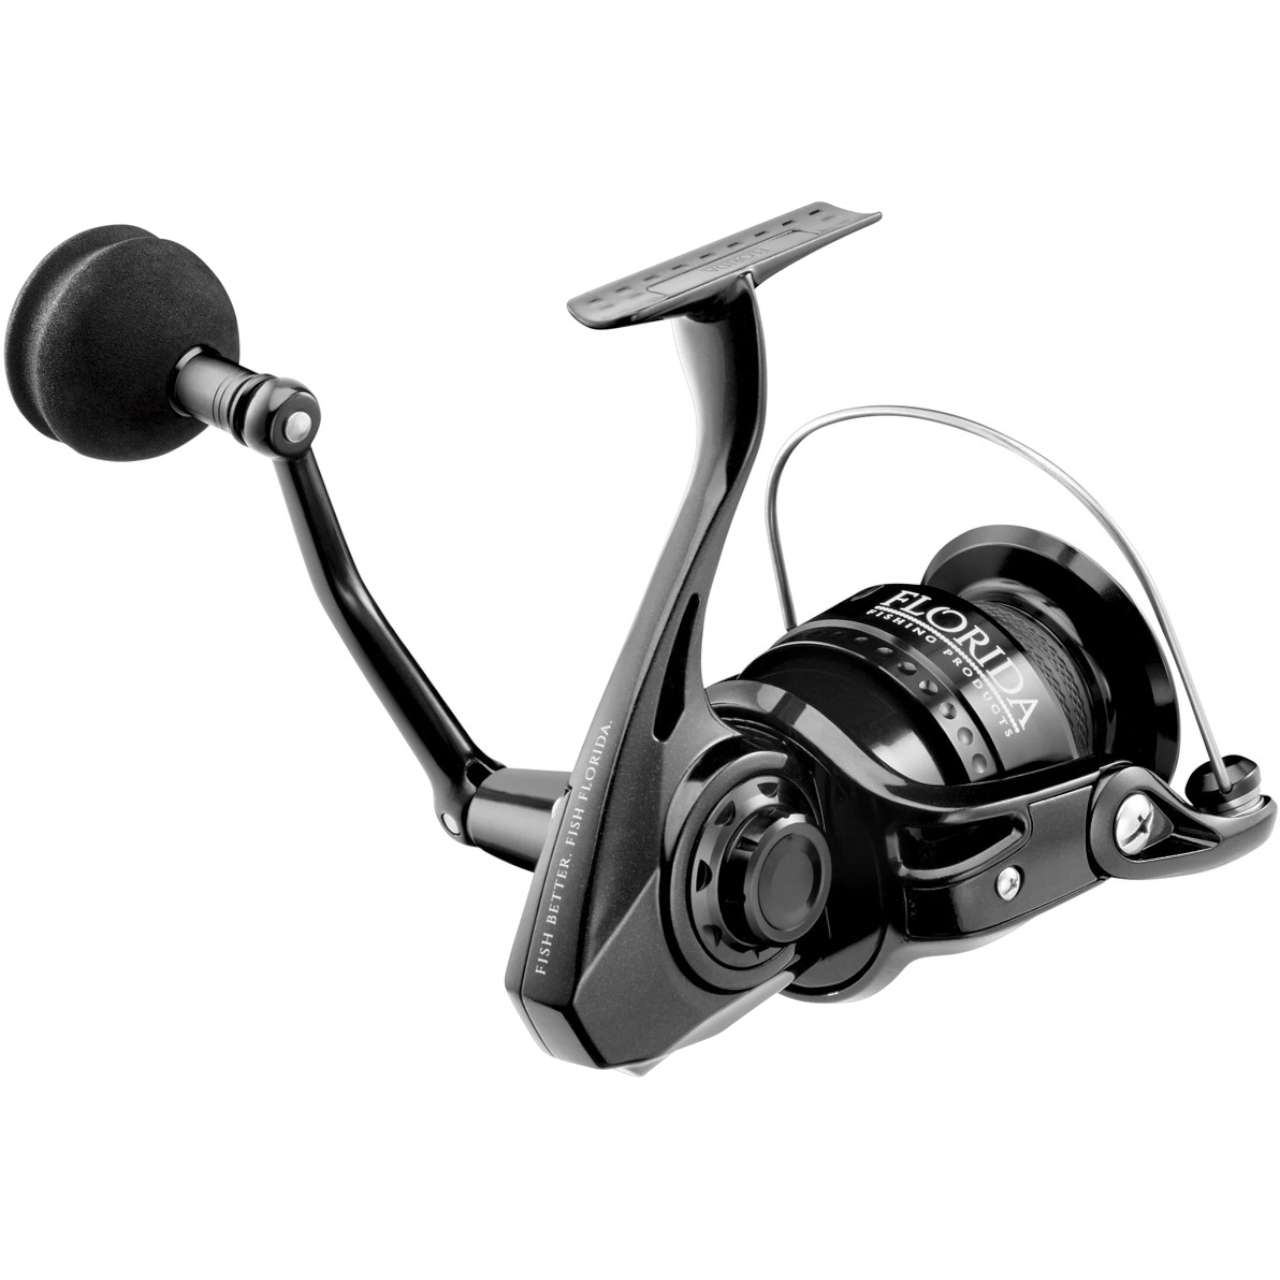 Florida Fishing Products Resolute Spinning Reel 4000 - TackleDirect